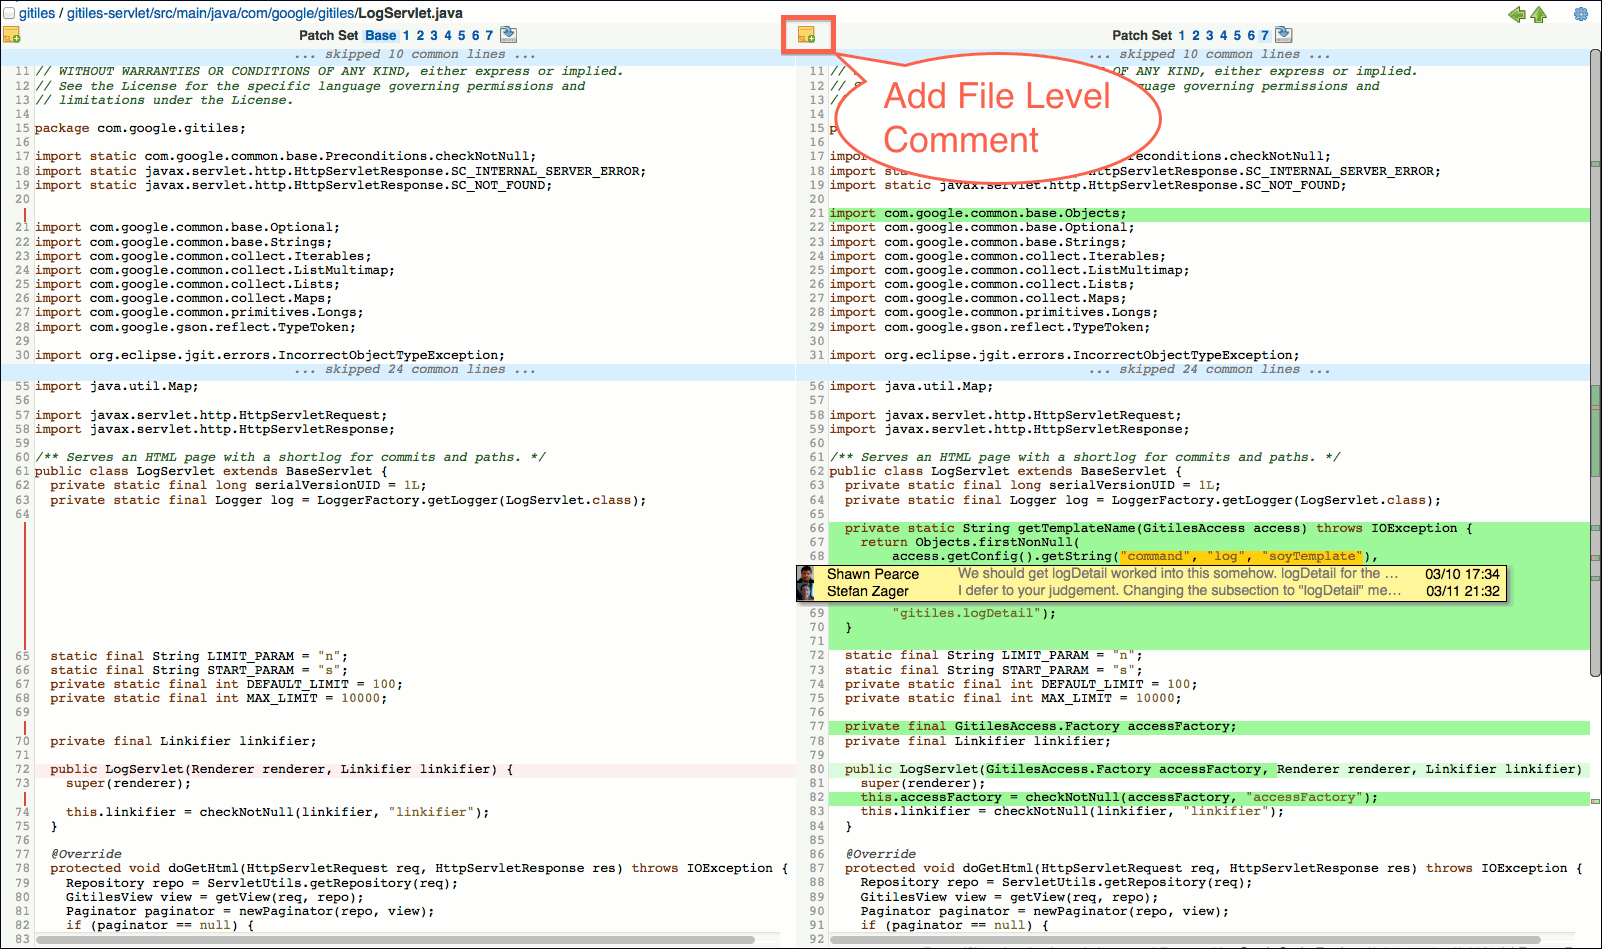 user review ui side by side diff screen file level comment